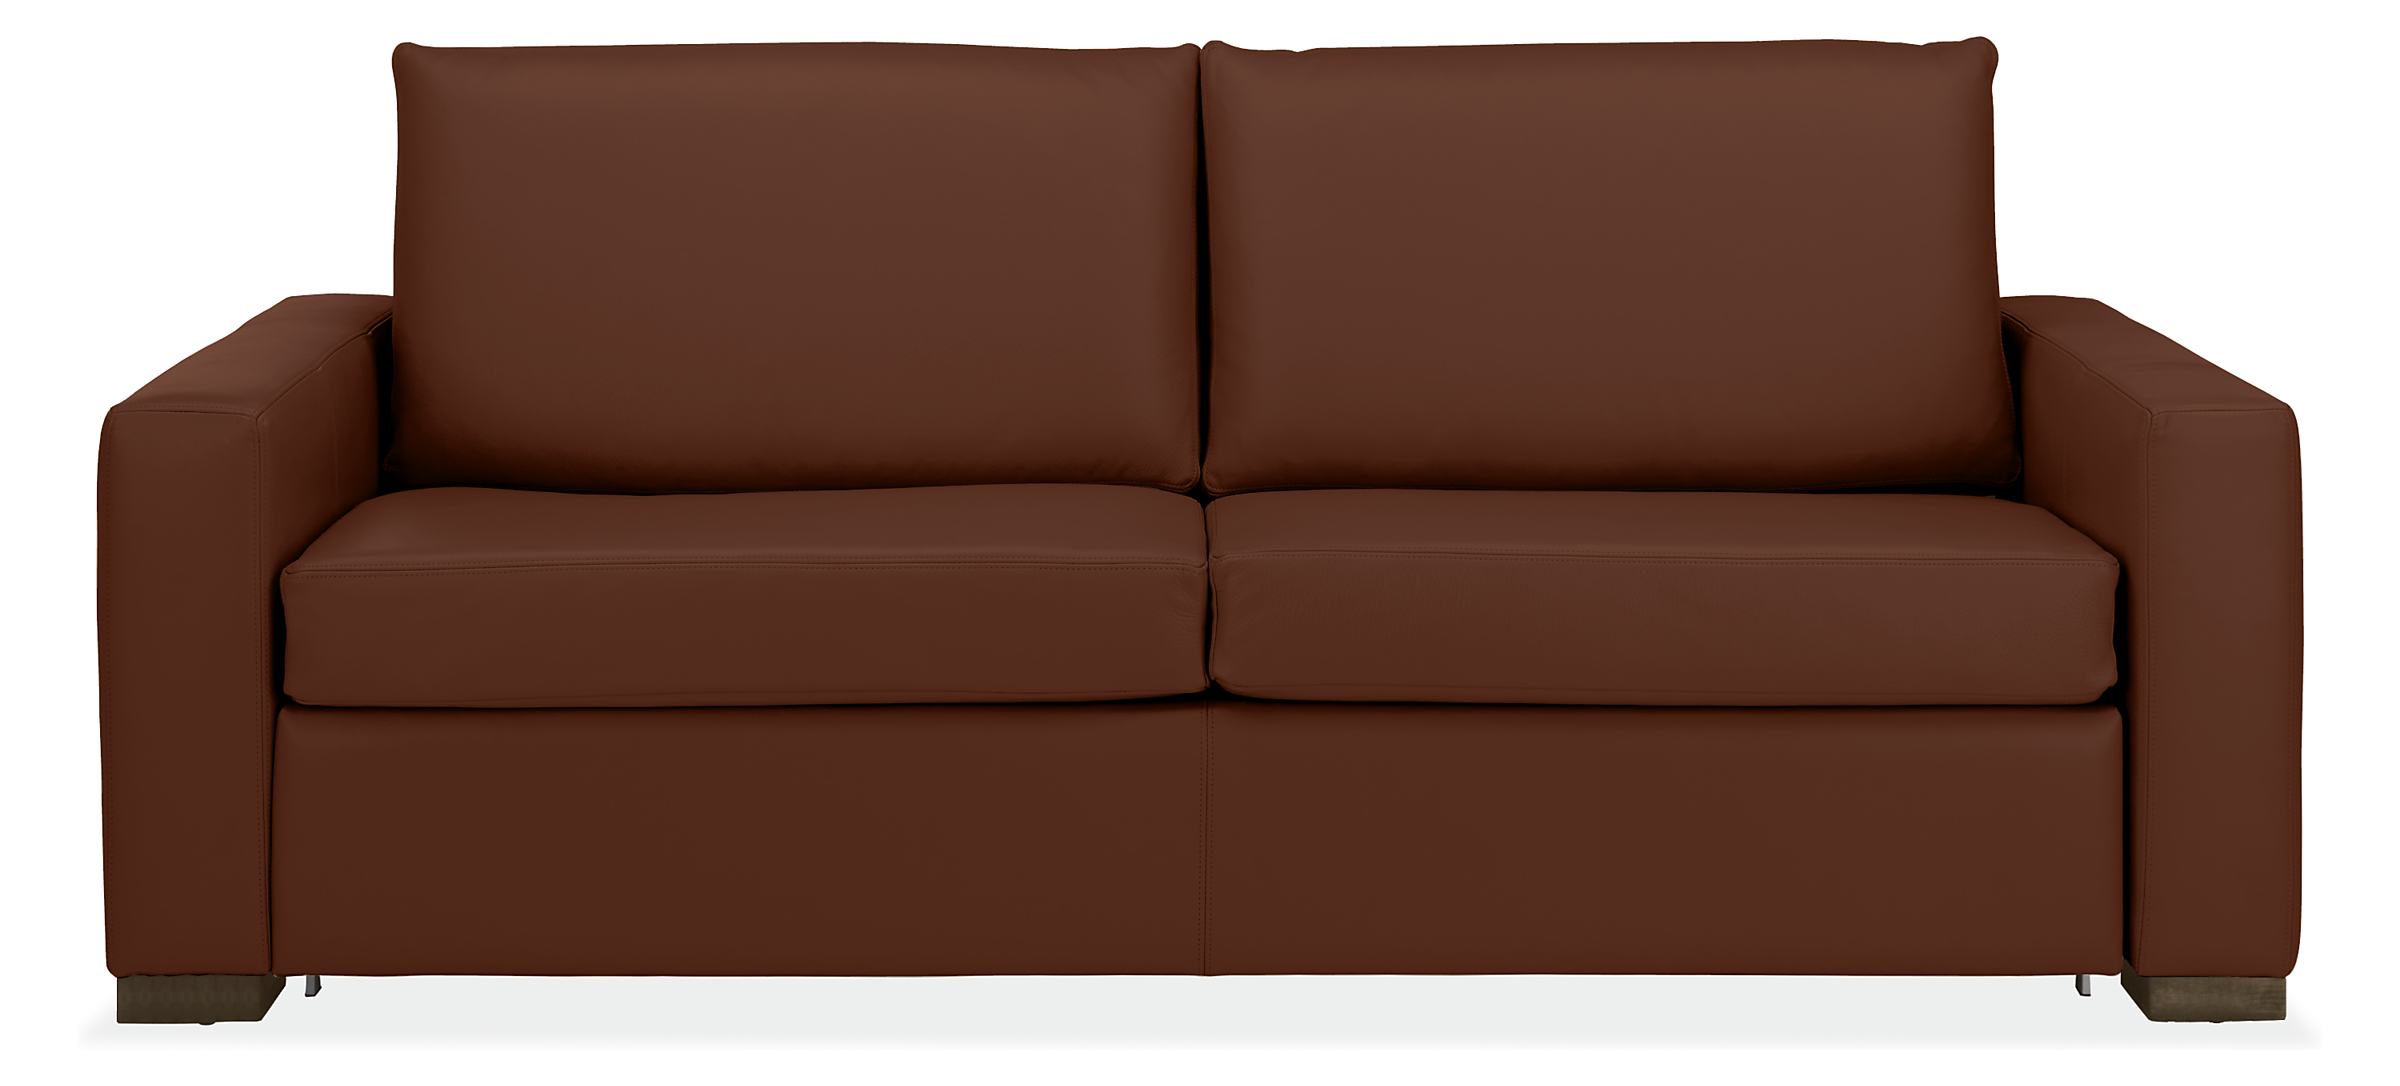 Metro Leather Fold-out Sleeper